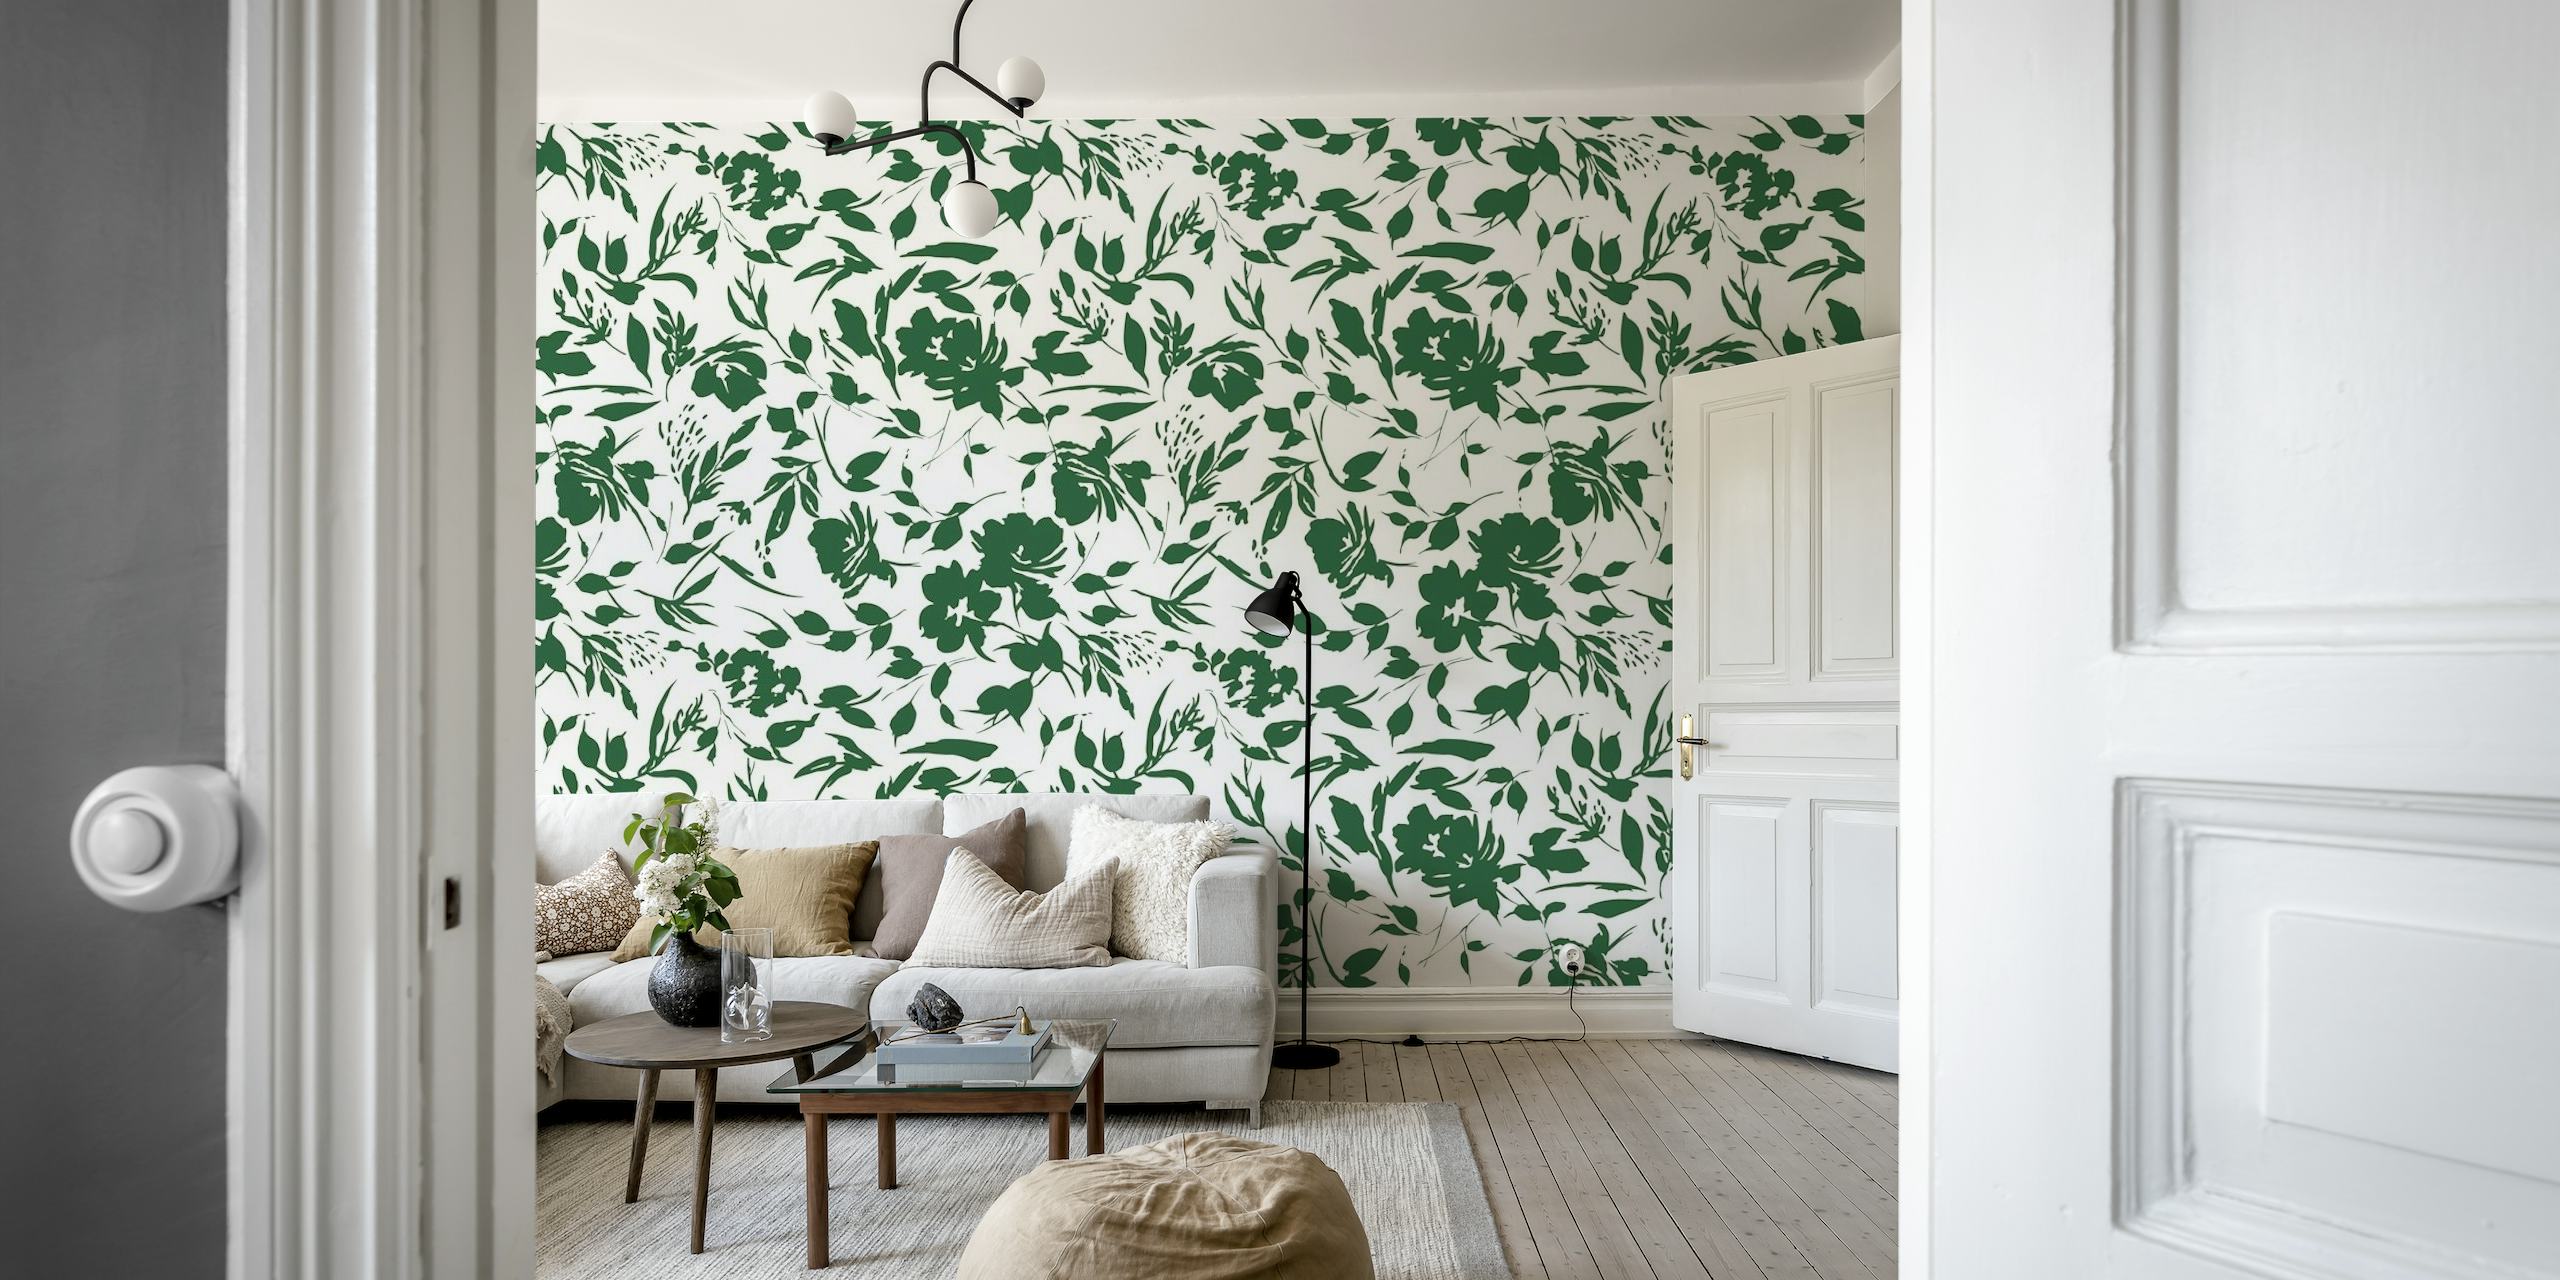 Monochrome wall mural with a wild garden theme showing black and white floral patterns